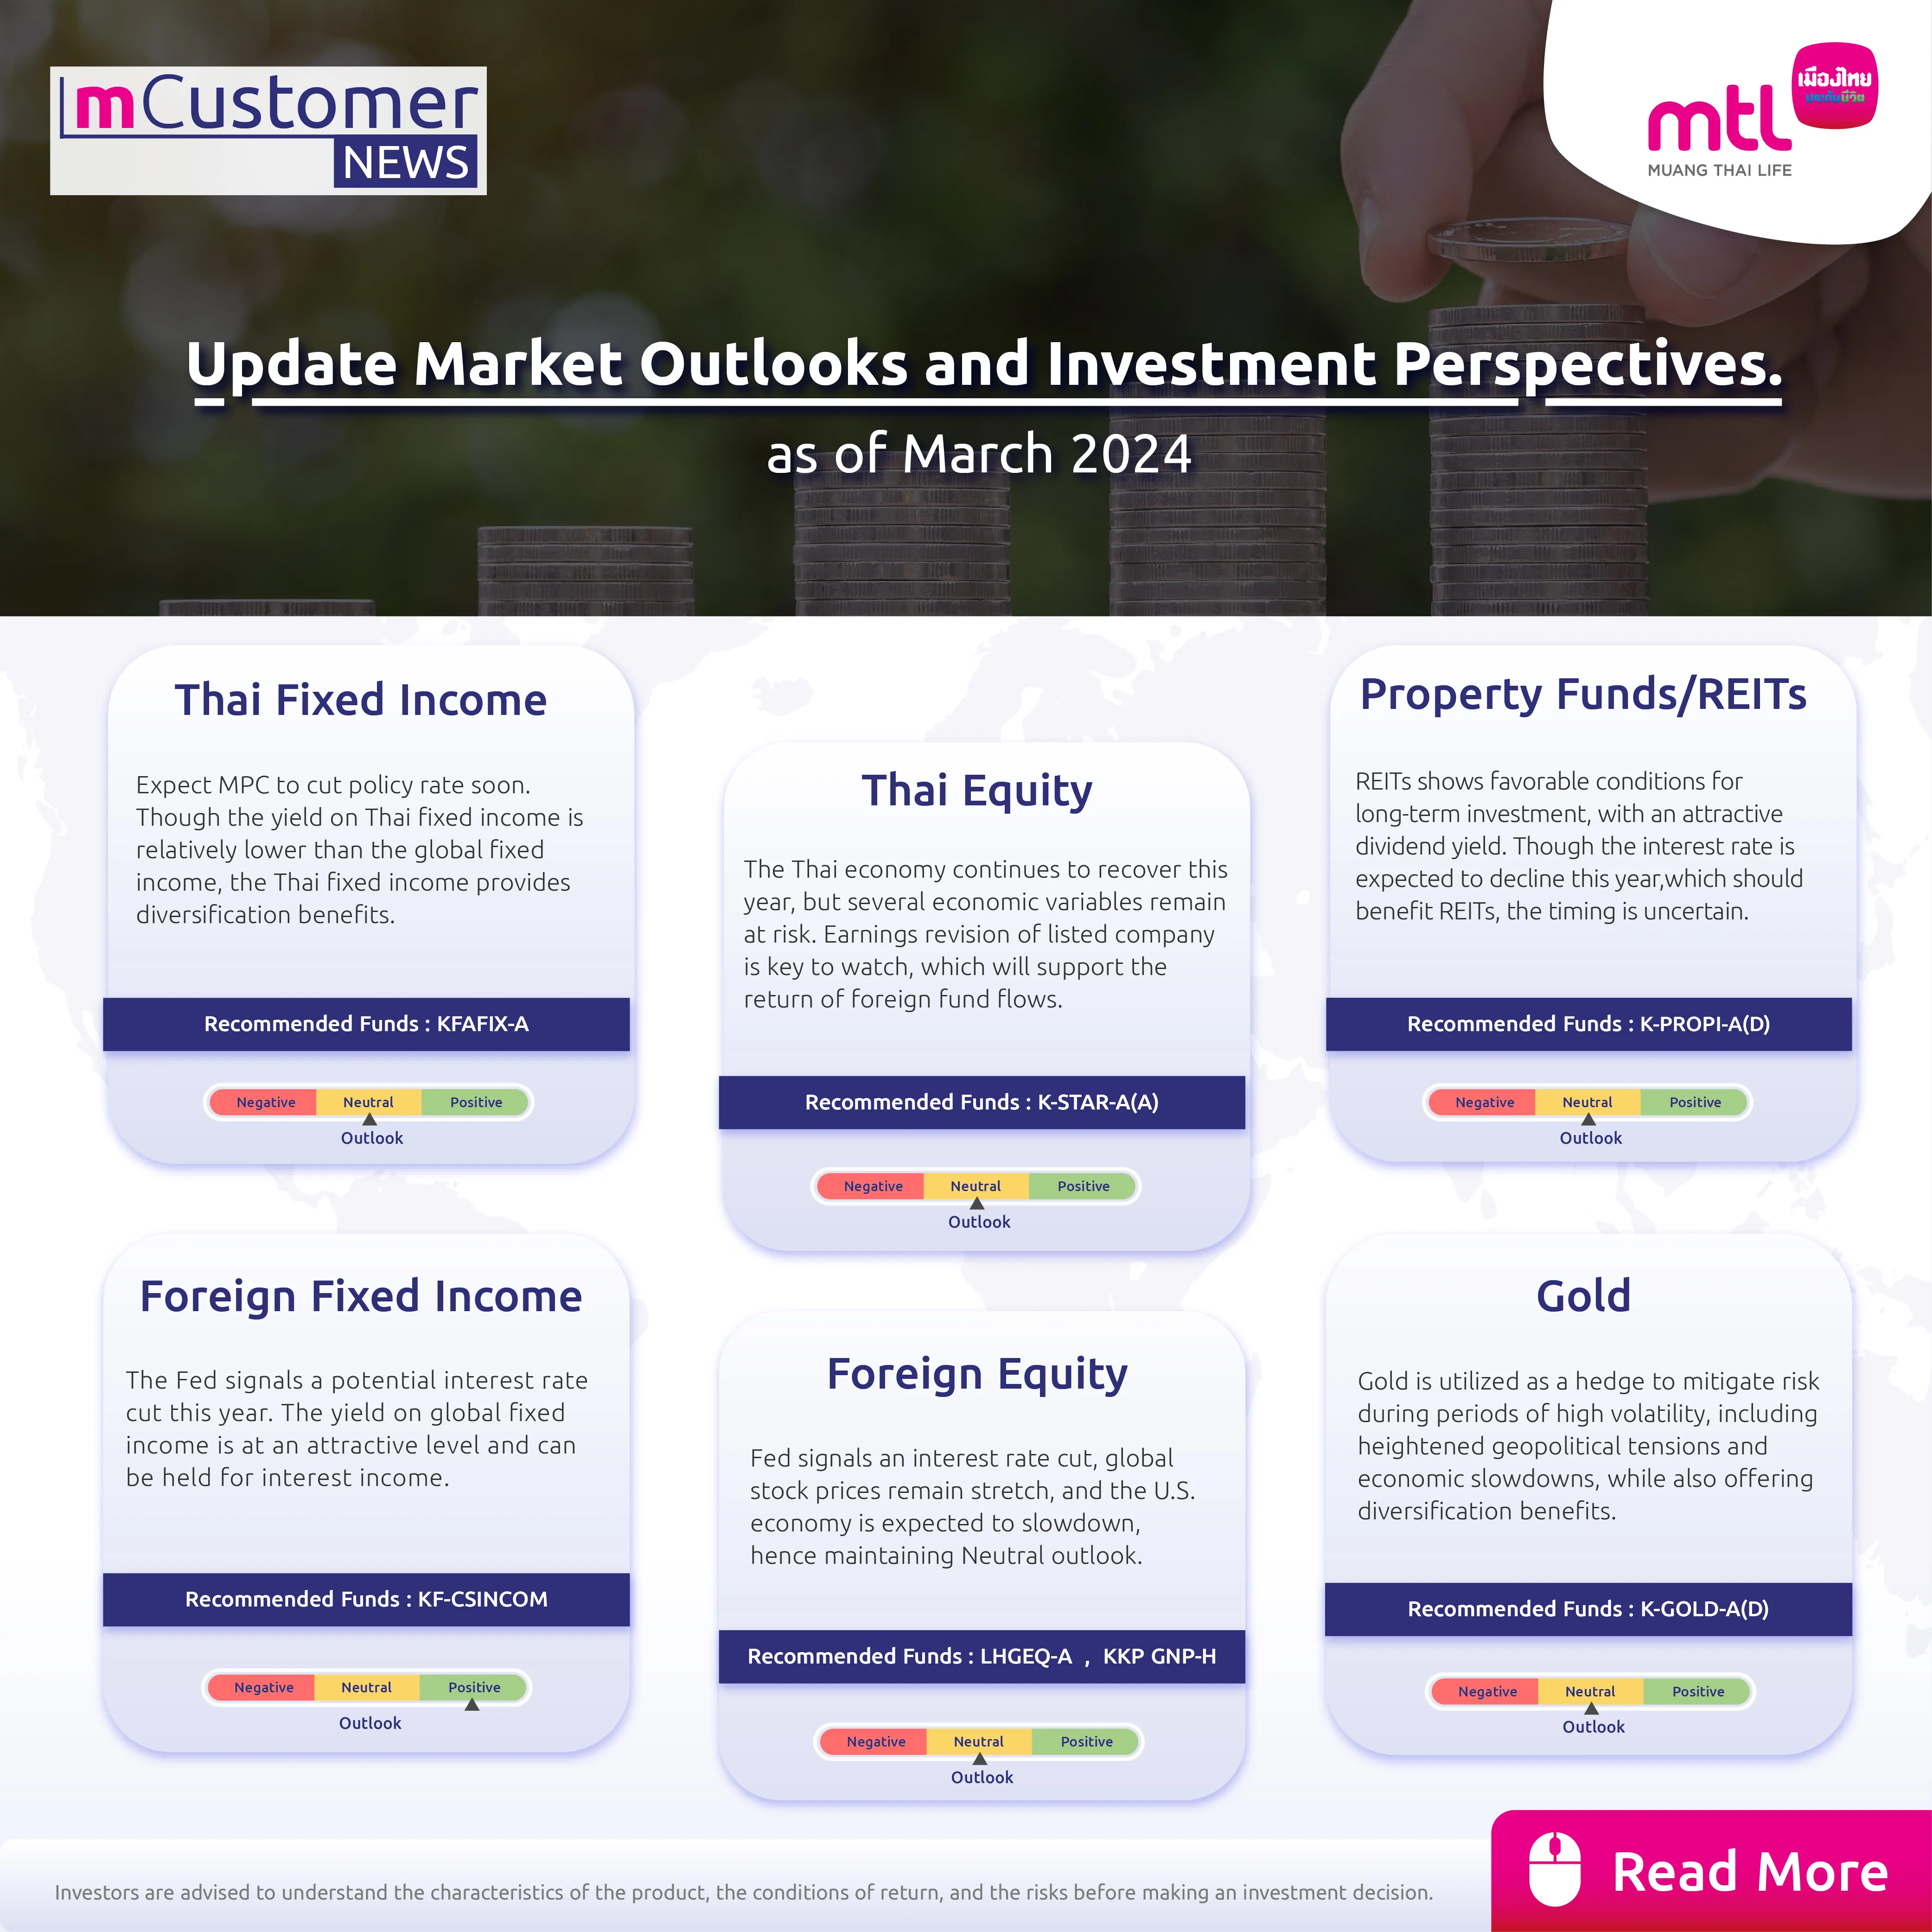 Update Market Outlooks and Investment Perspectives as of March 2024